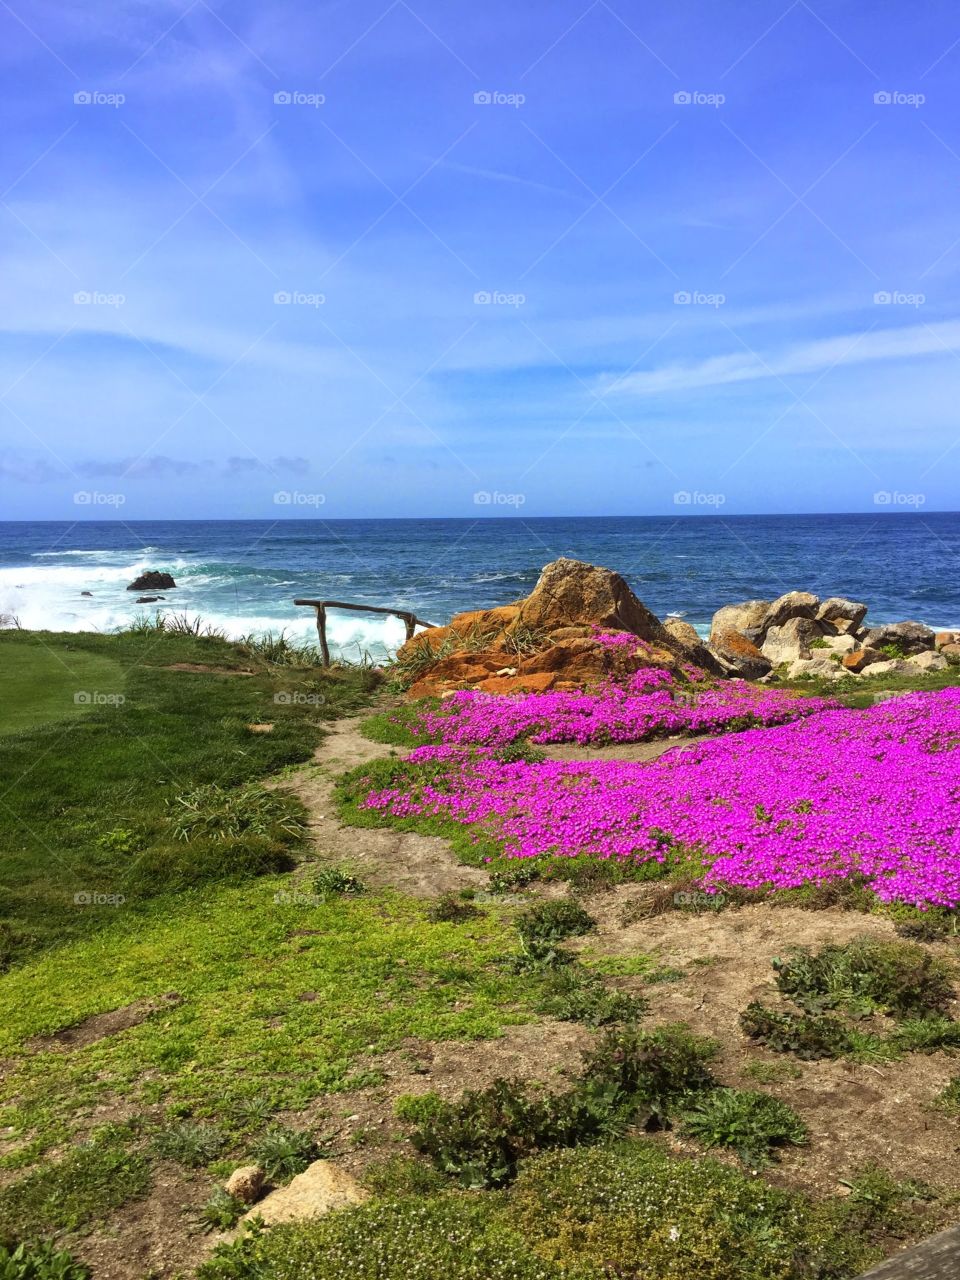 Pink flower carpet. Flowers along coast in Pacific Grove